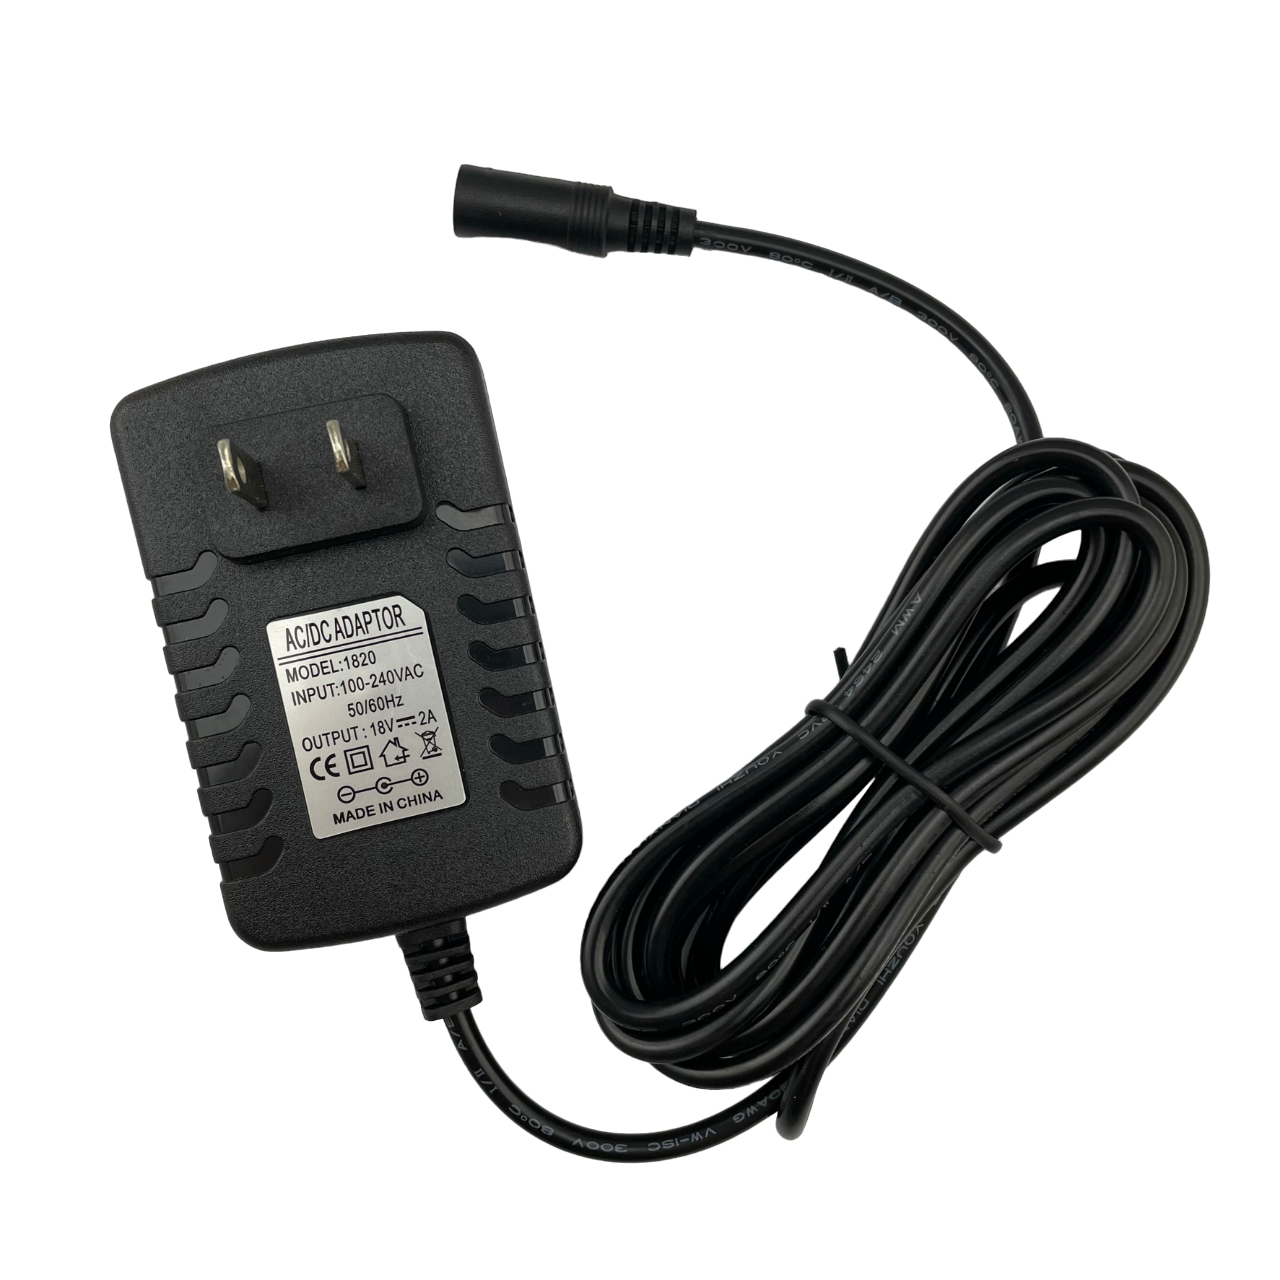 10ft SMAVCO 18V AC/DC Power Adapter for Levolor Motorized Blinds and Power Shades - Black-SMAVtronics